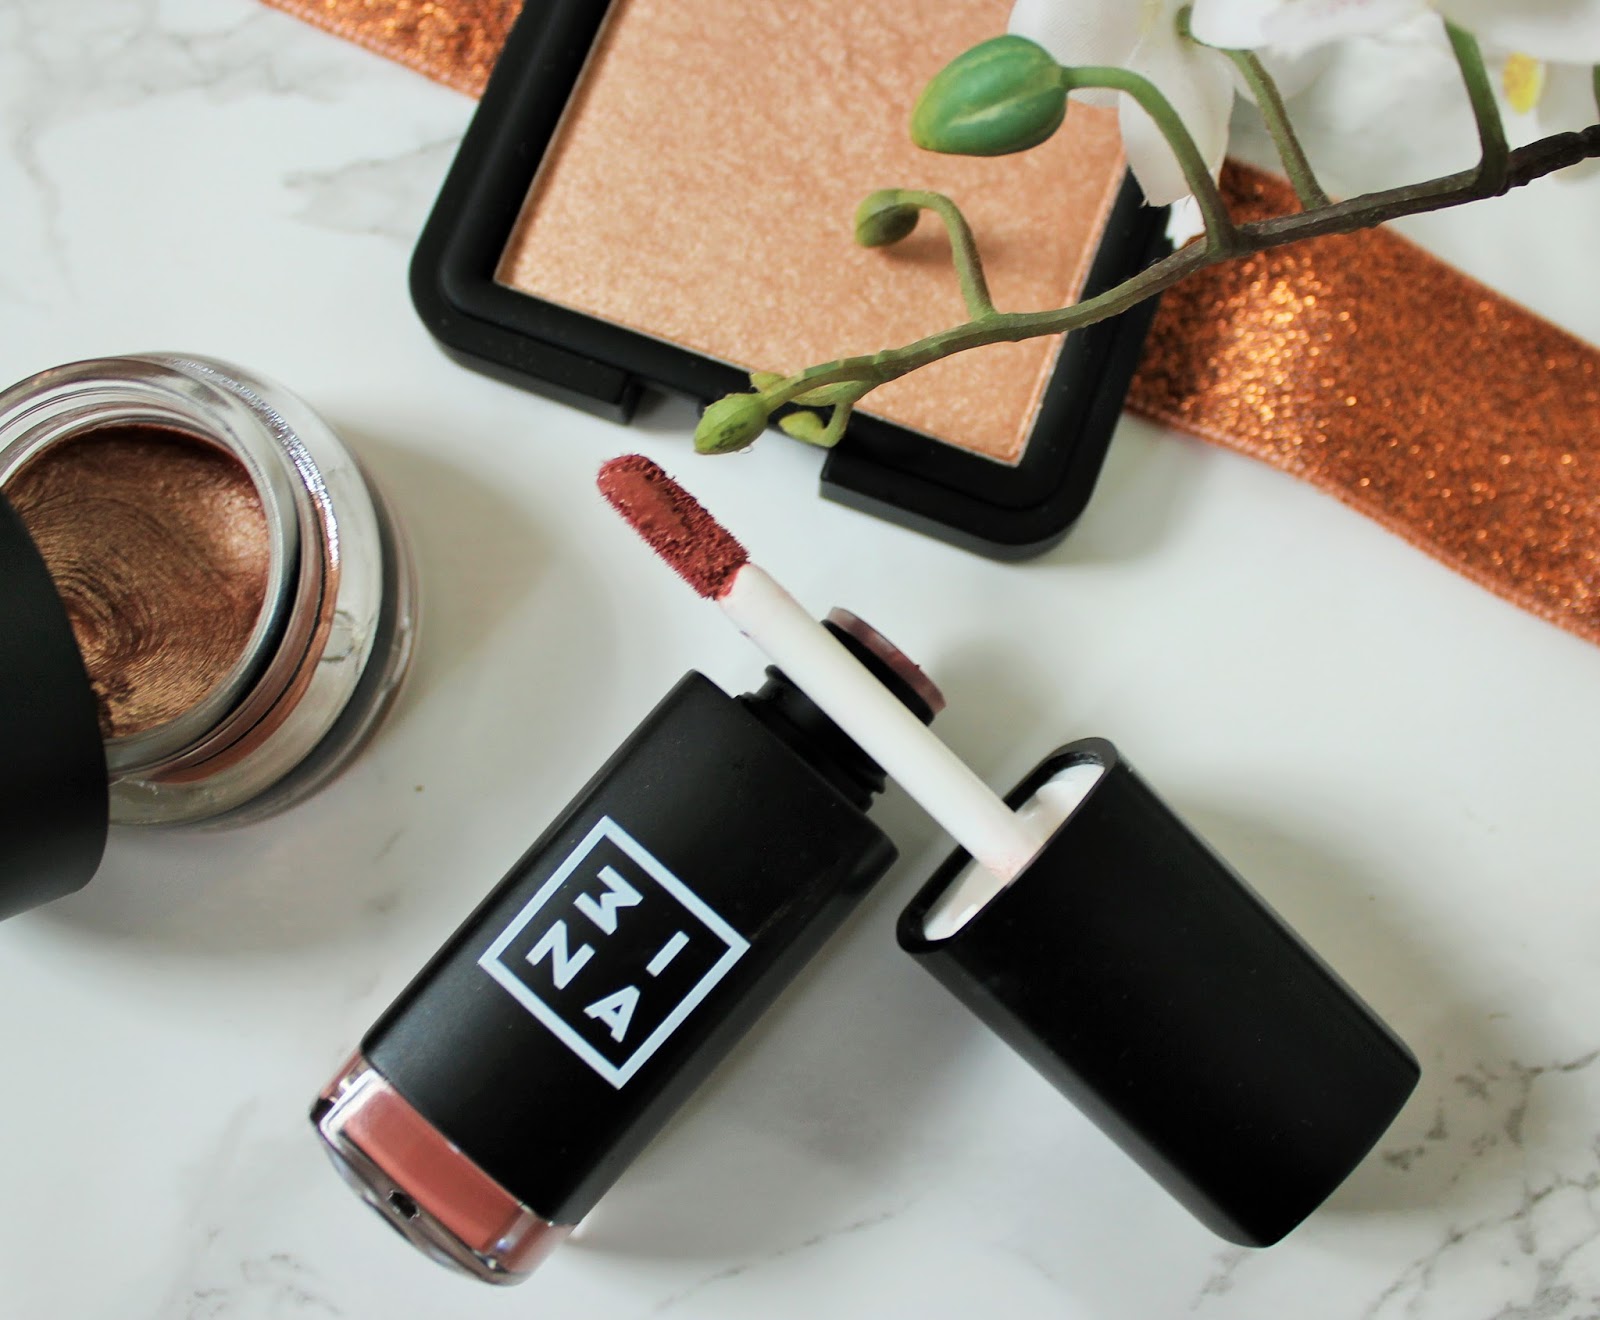 3ina bestselling makeup products - The Longwear Lipstick 503